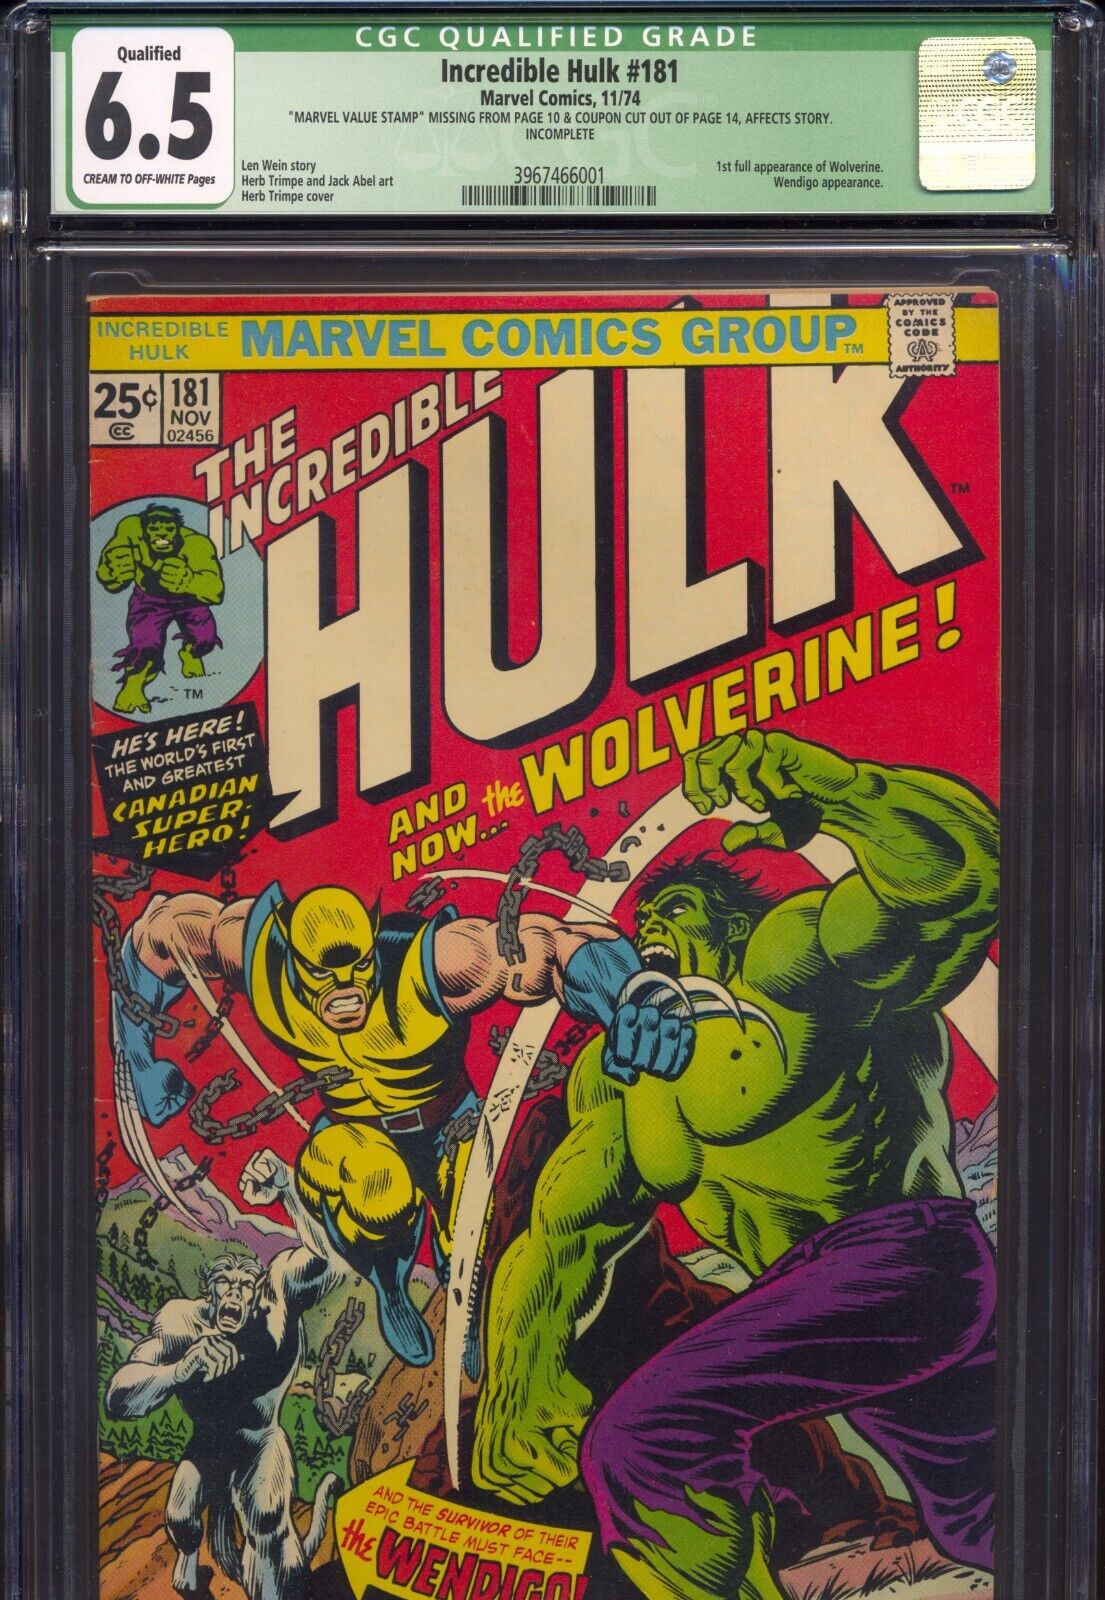 Incredible Hulk 181 1974 1st full Wolverine appearance CGC Qualified 65 